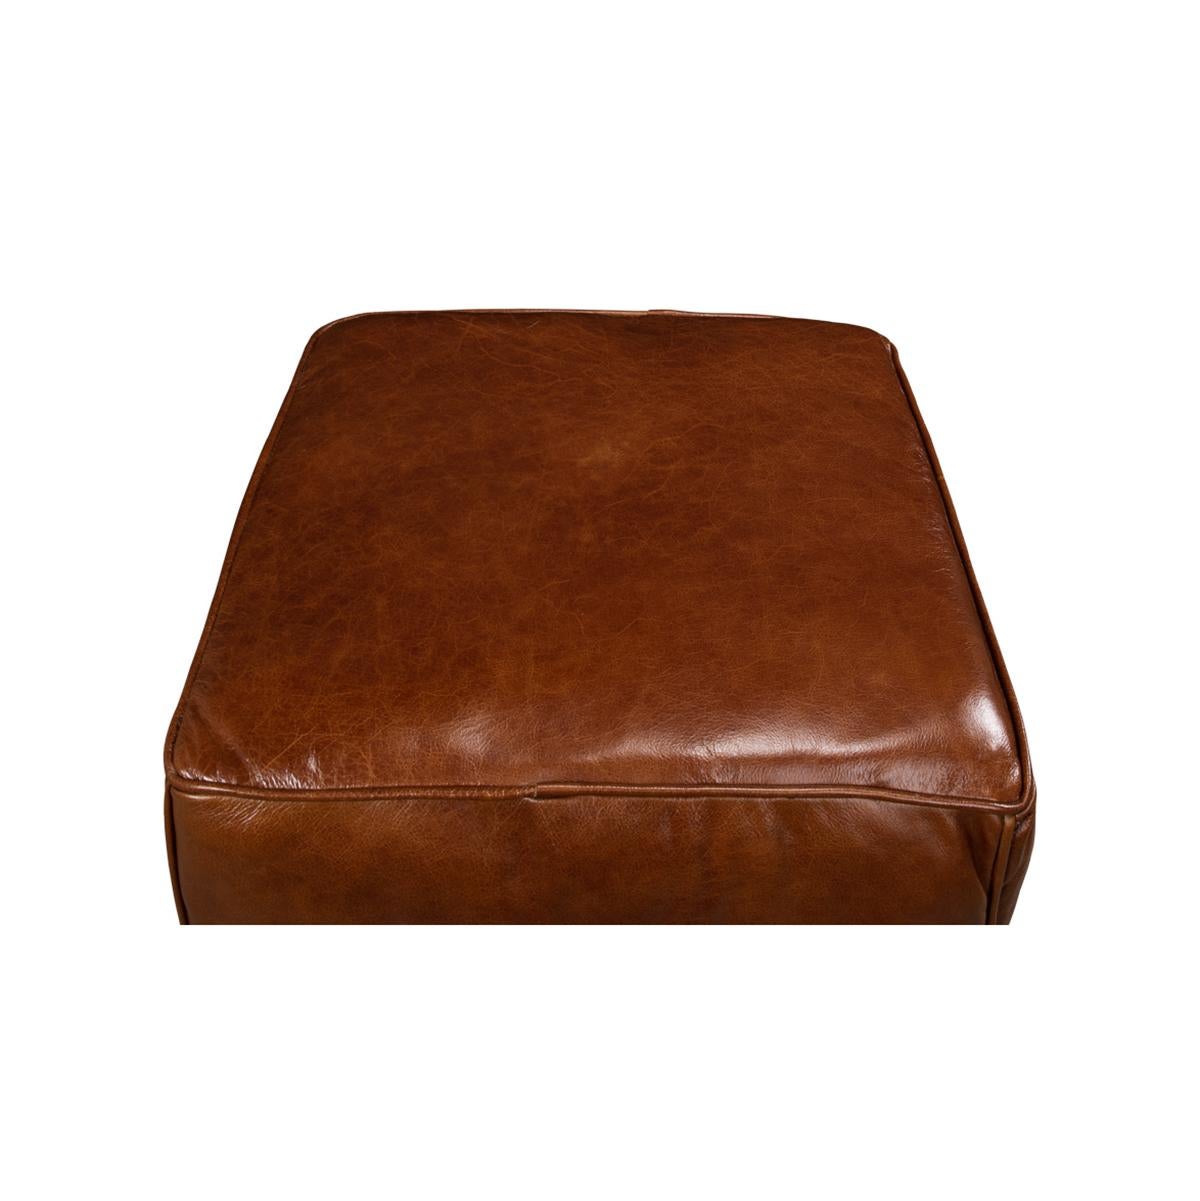 Asian Jefferson Leather Sitting Cube For Sale